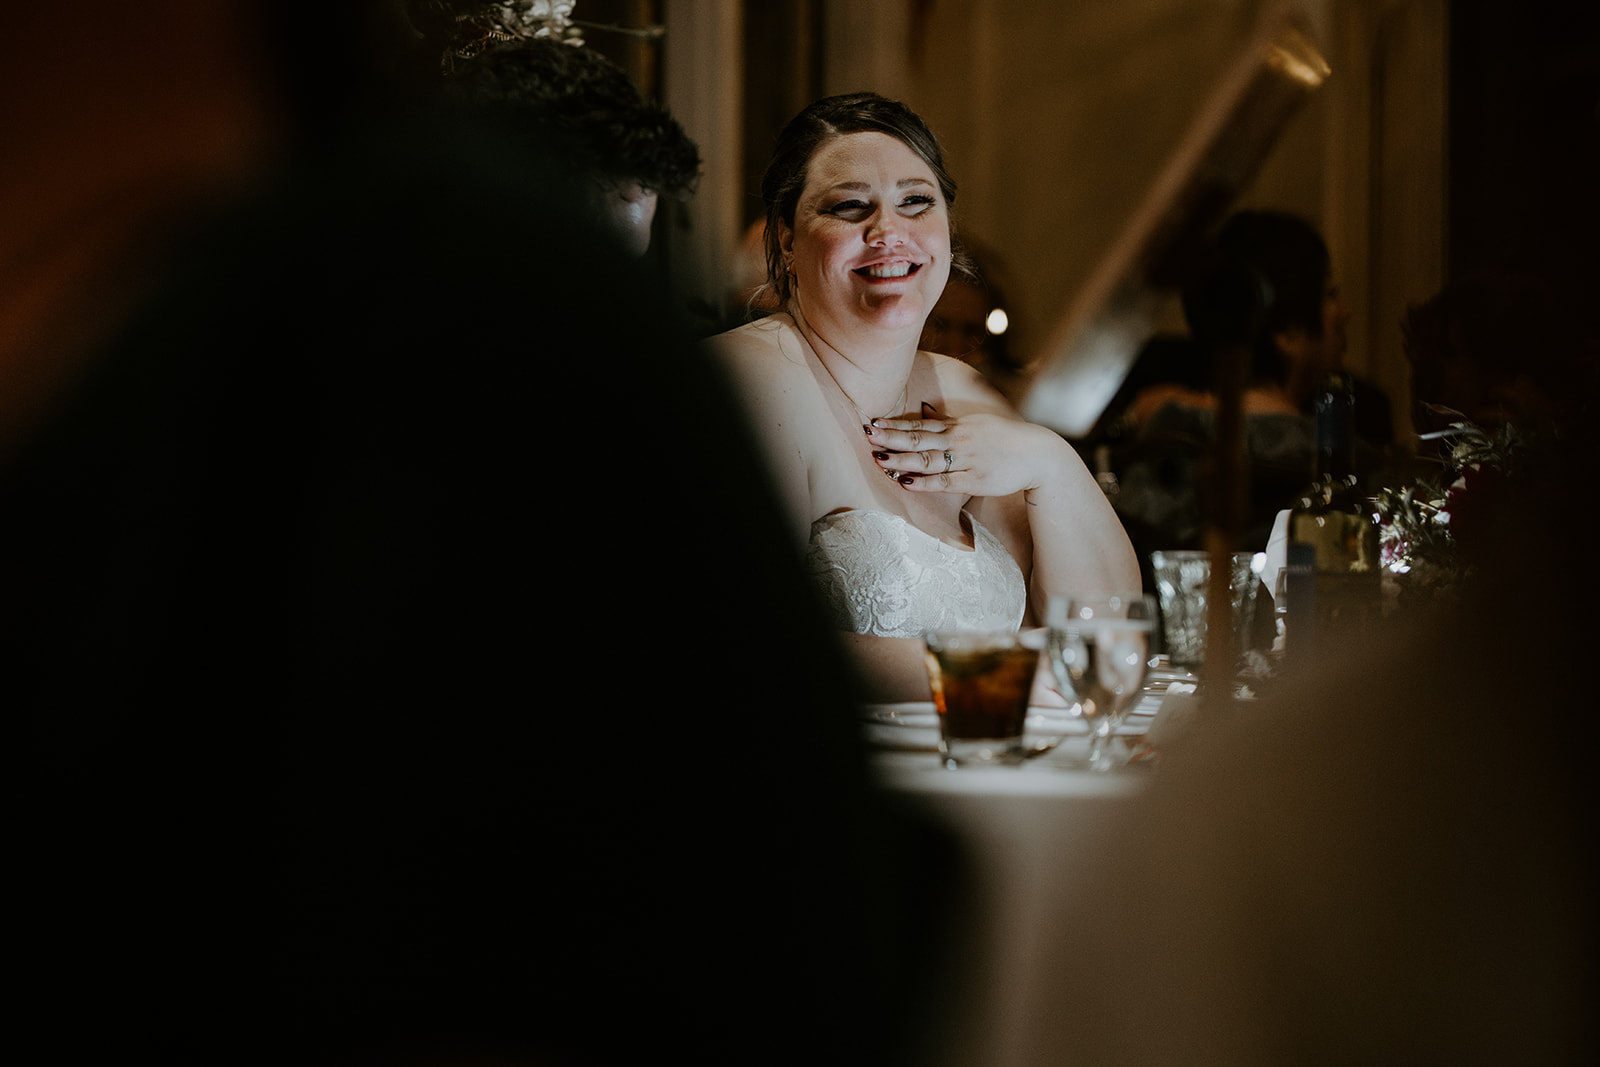 Wedding Reception Photography at Cecil Green Park House